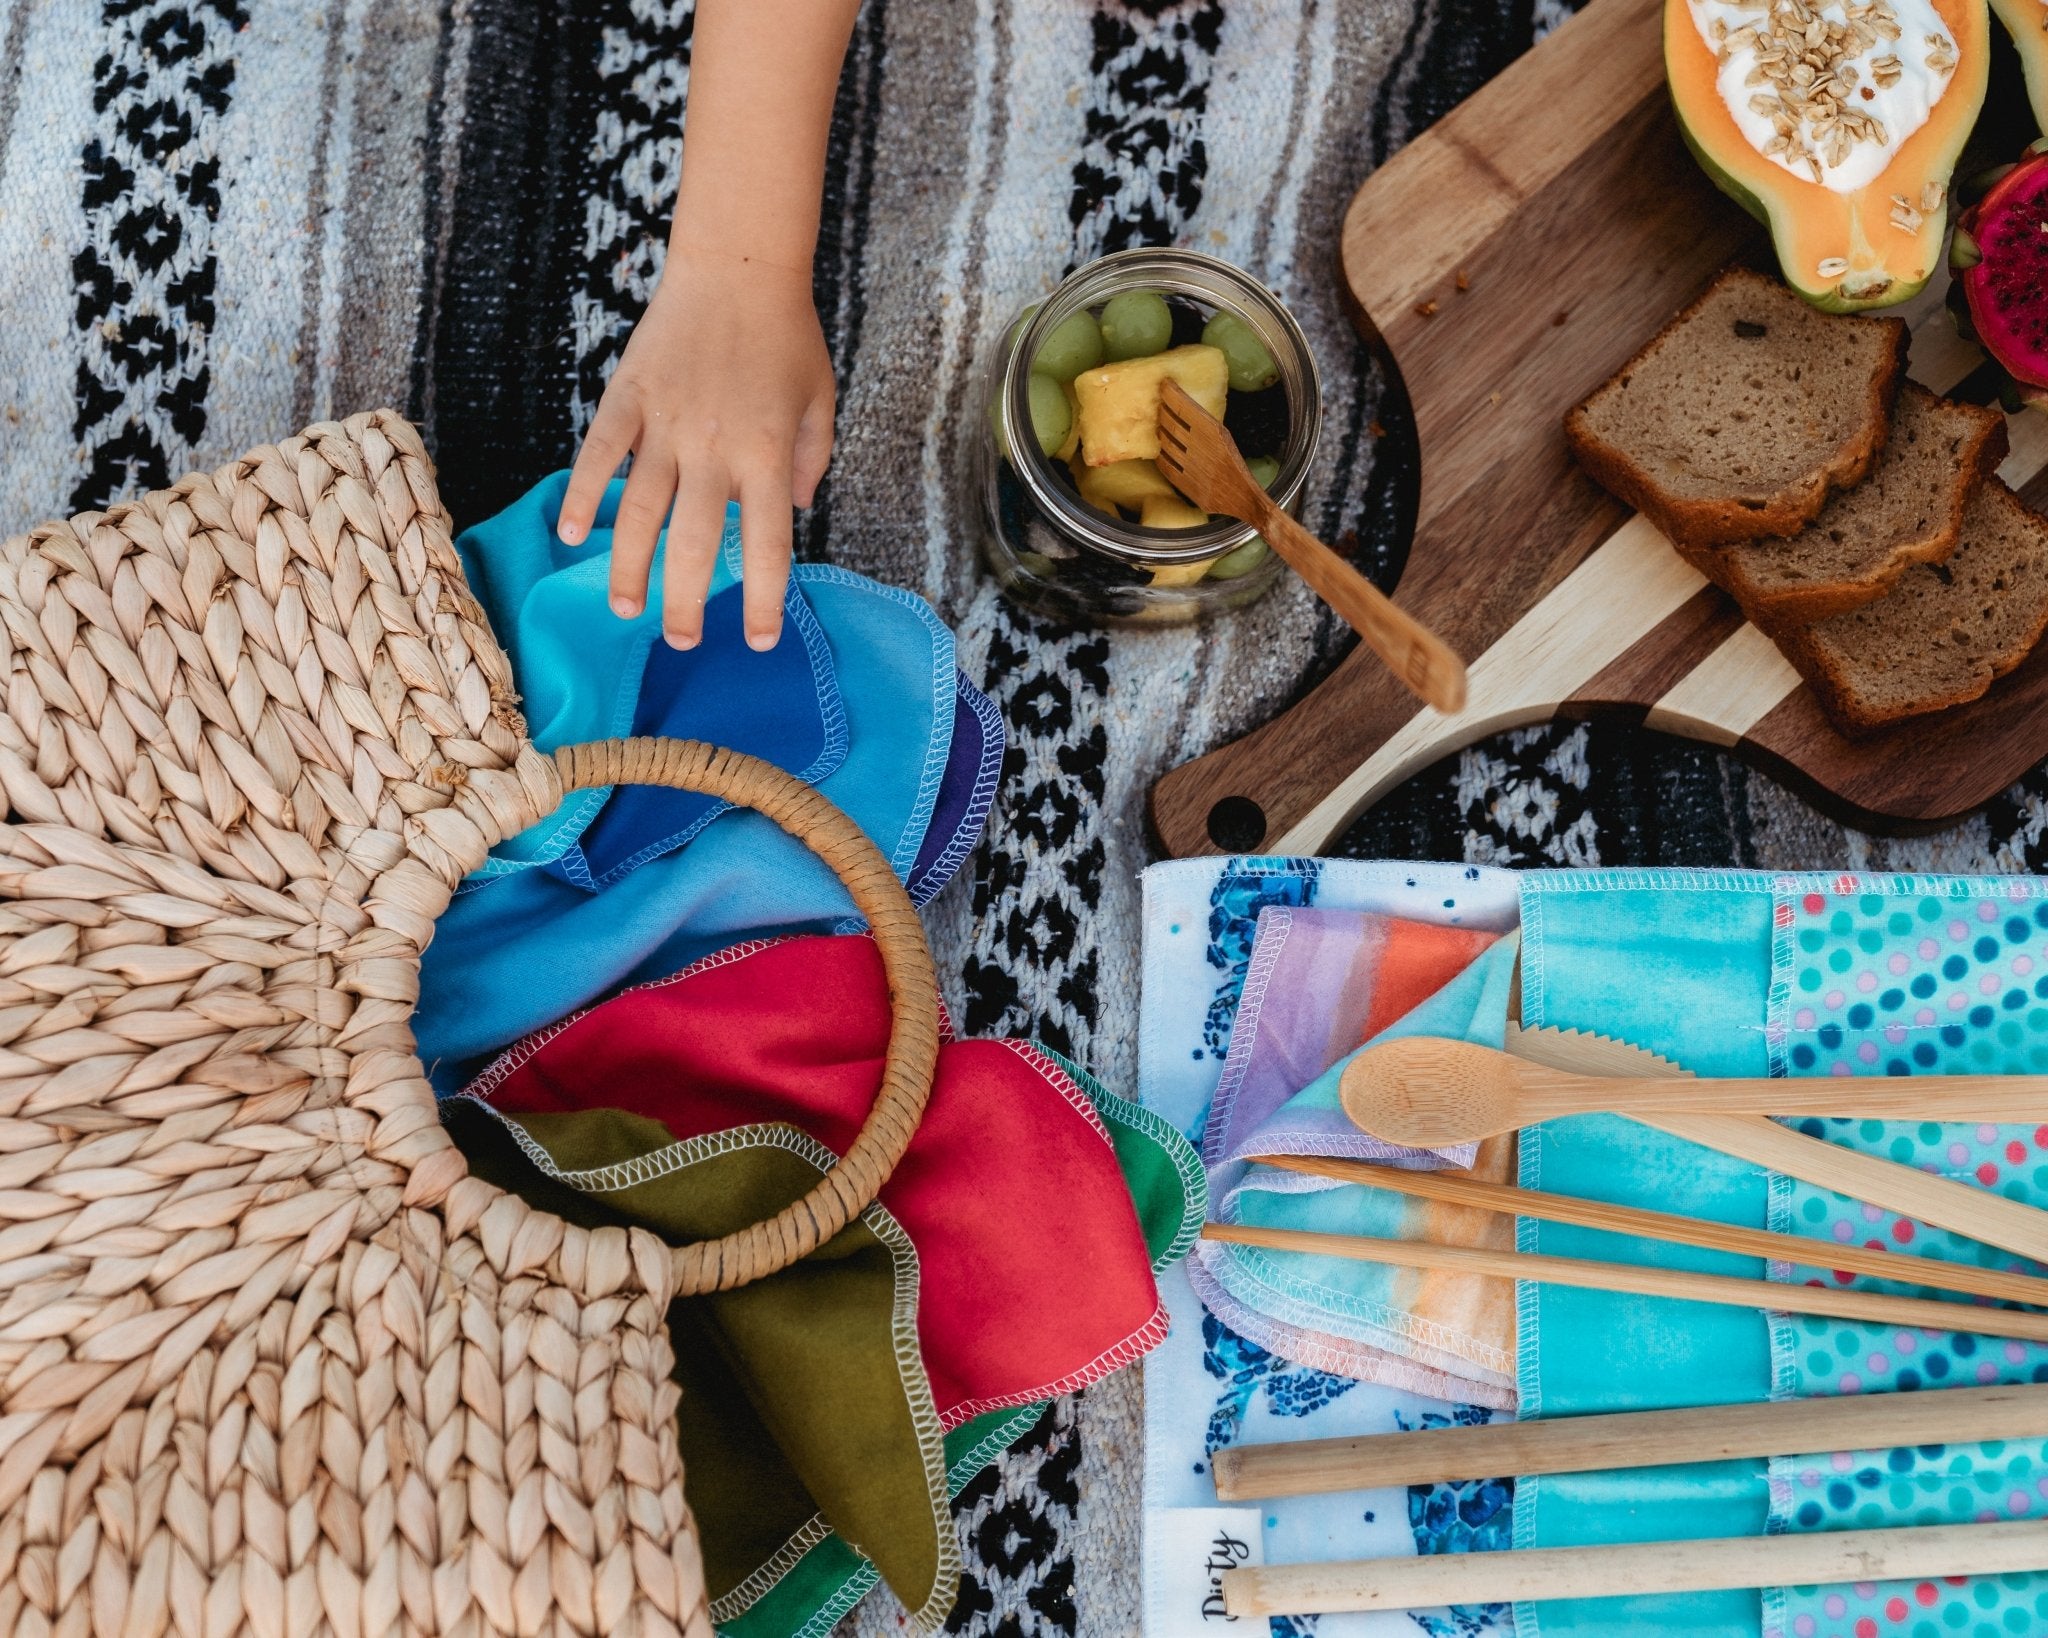 How to Pack a Plastic-Free Picnic - Marley's Monsters